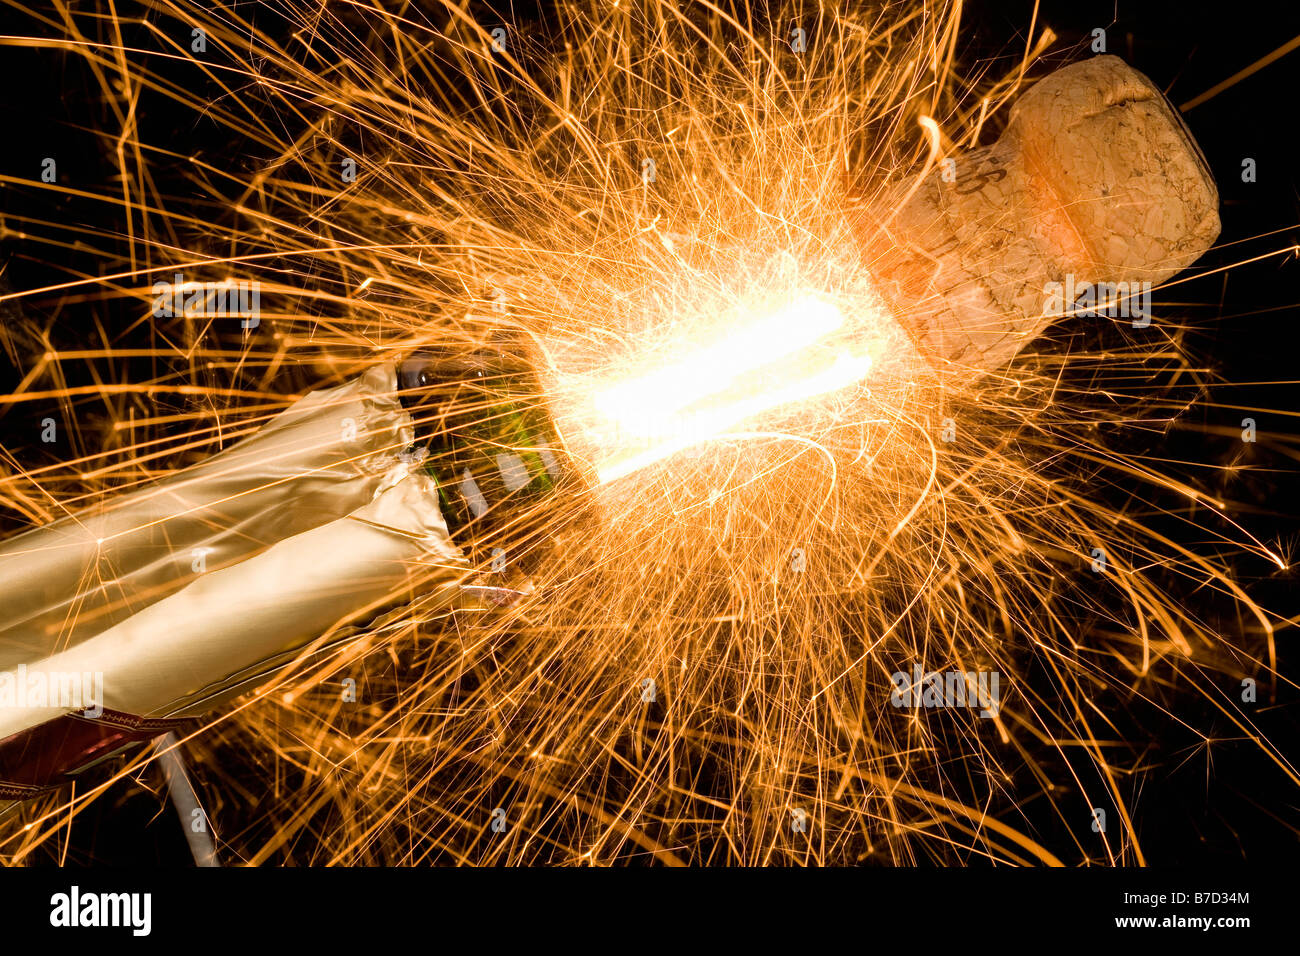 A champagne bottle opening with fireworks coming out Stock Photo